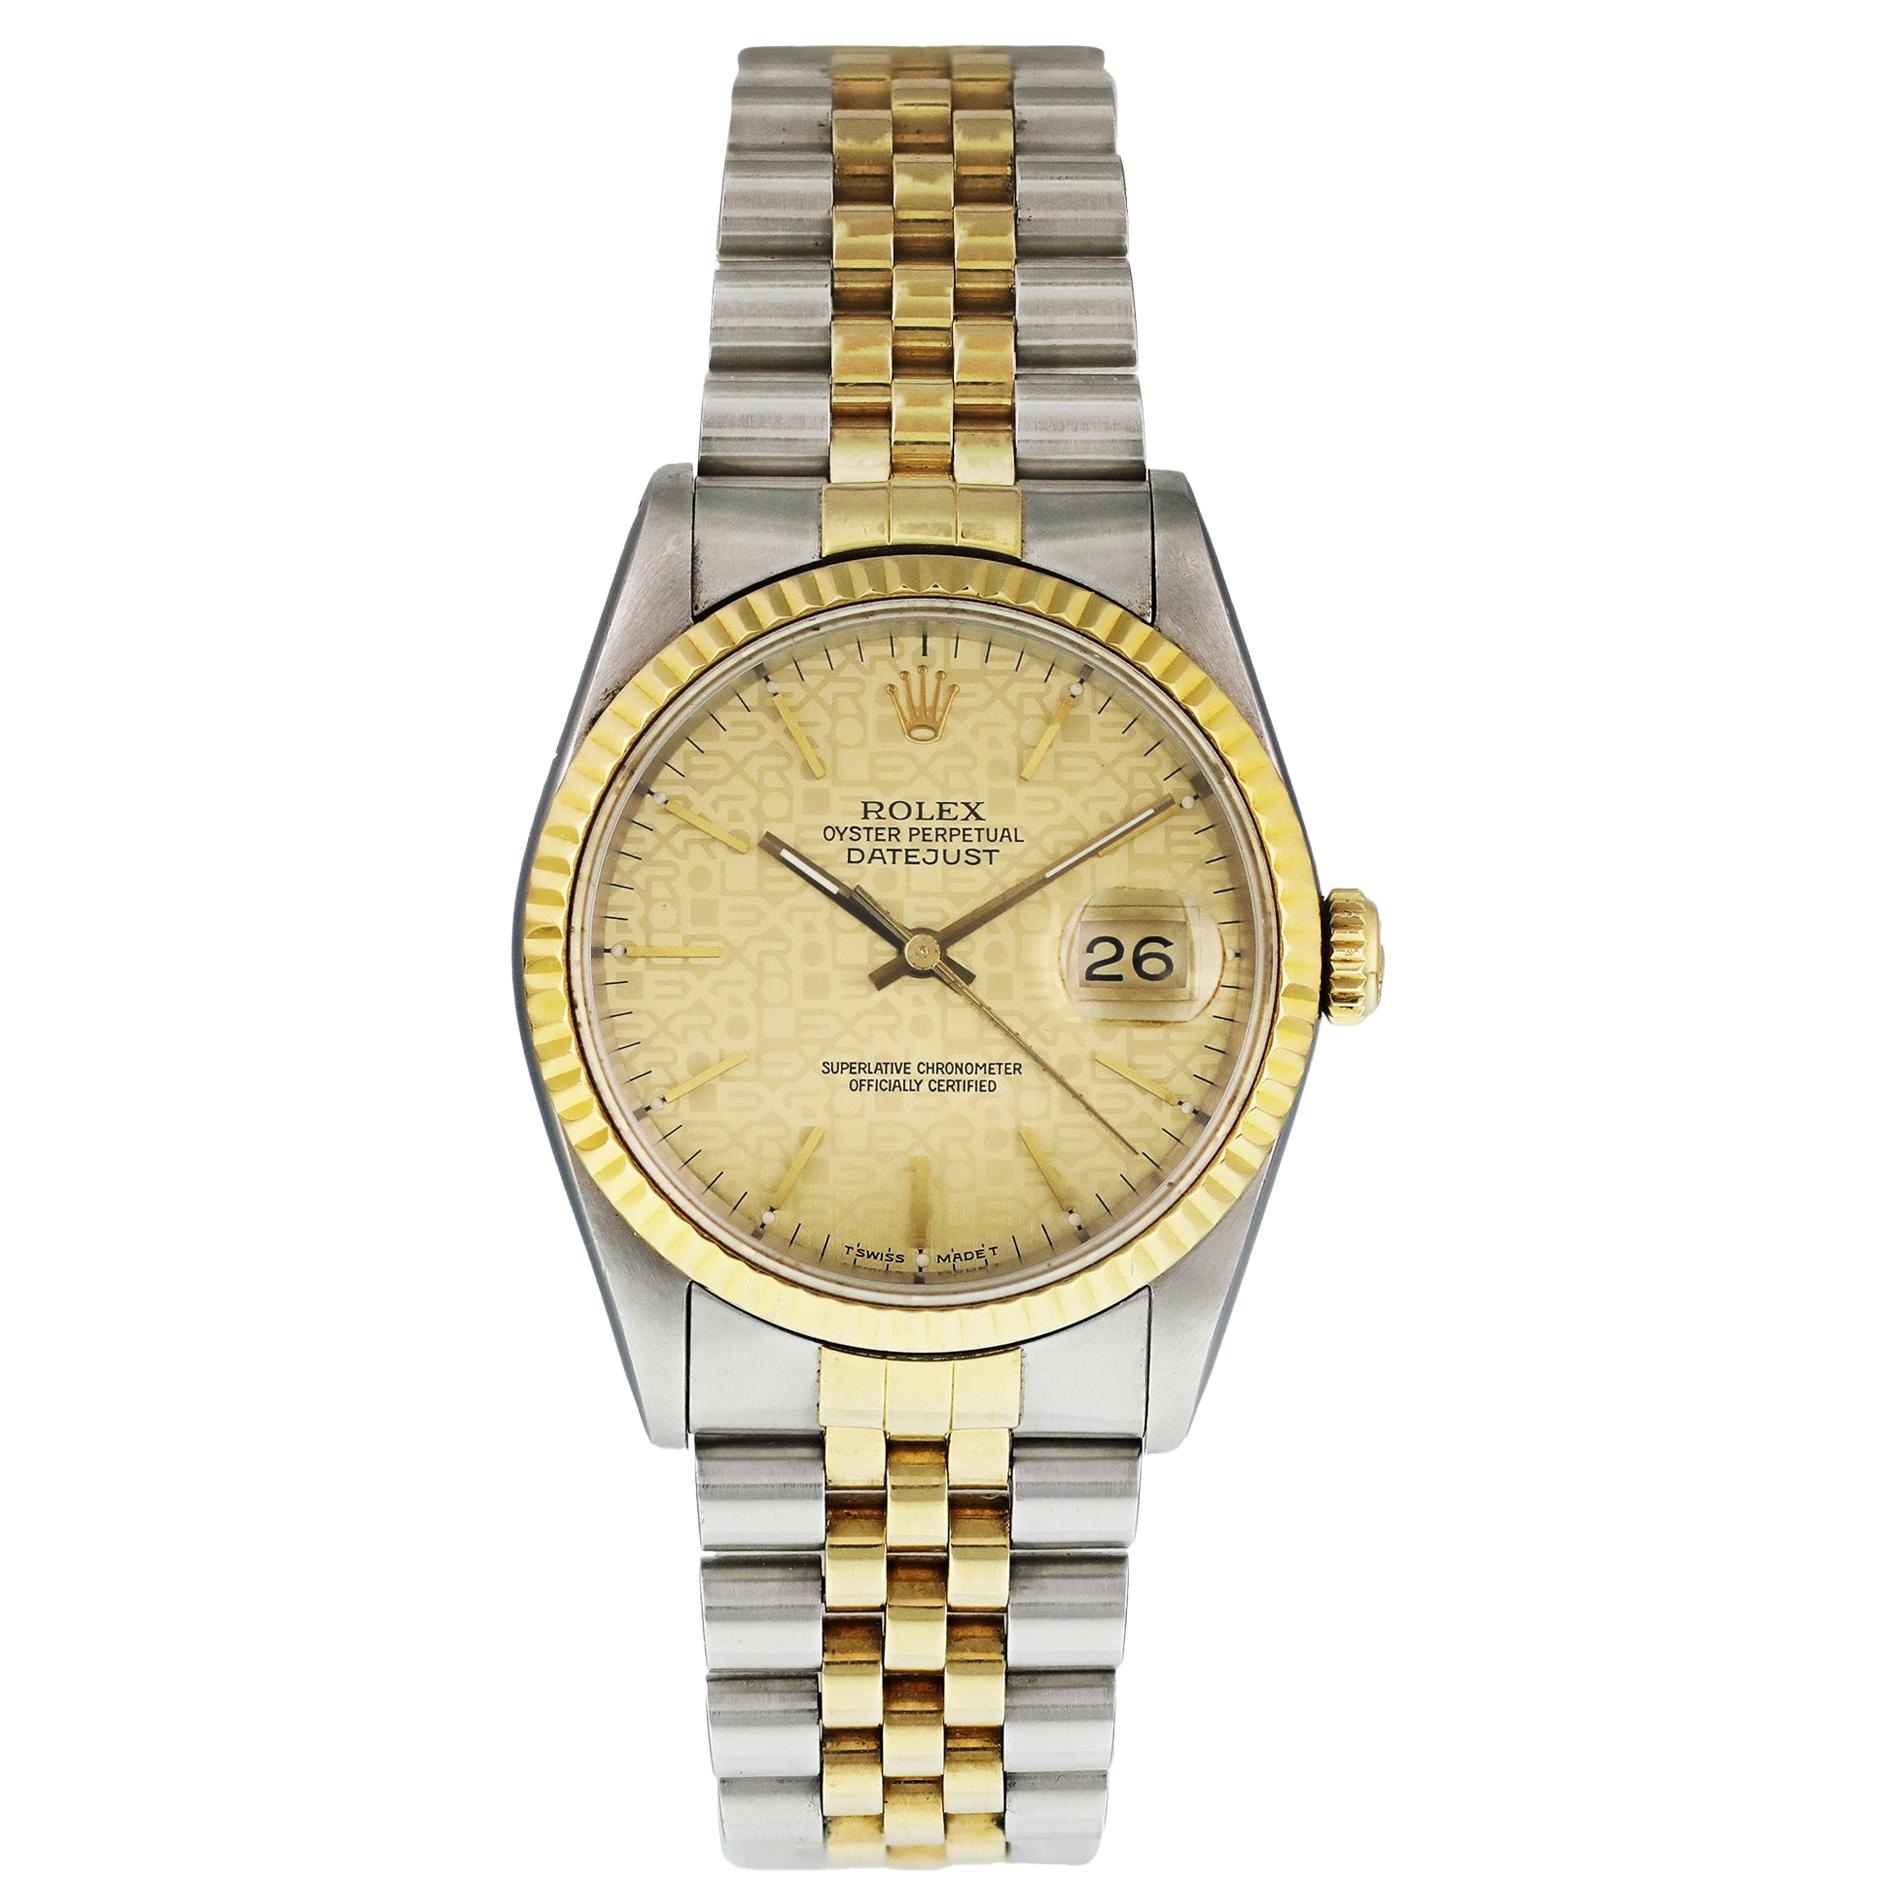 Rolex Datejust 16233 Champagne Jubilee Dial Men's Watch For Sale